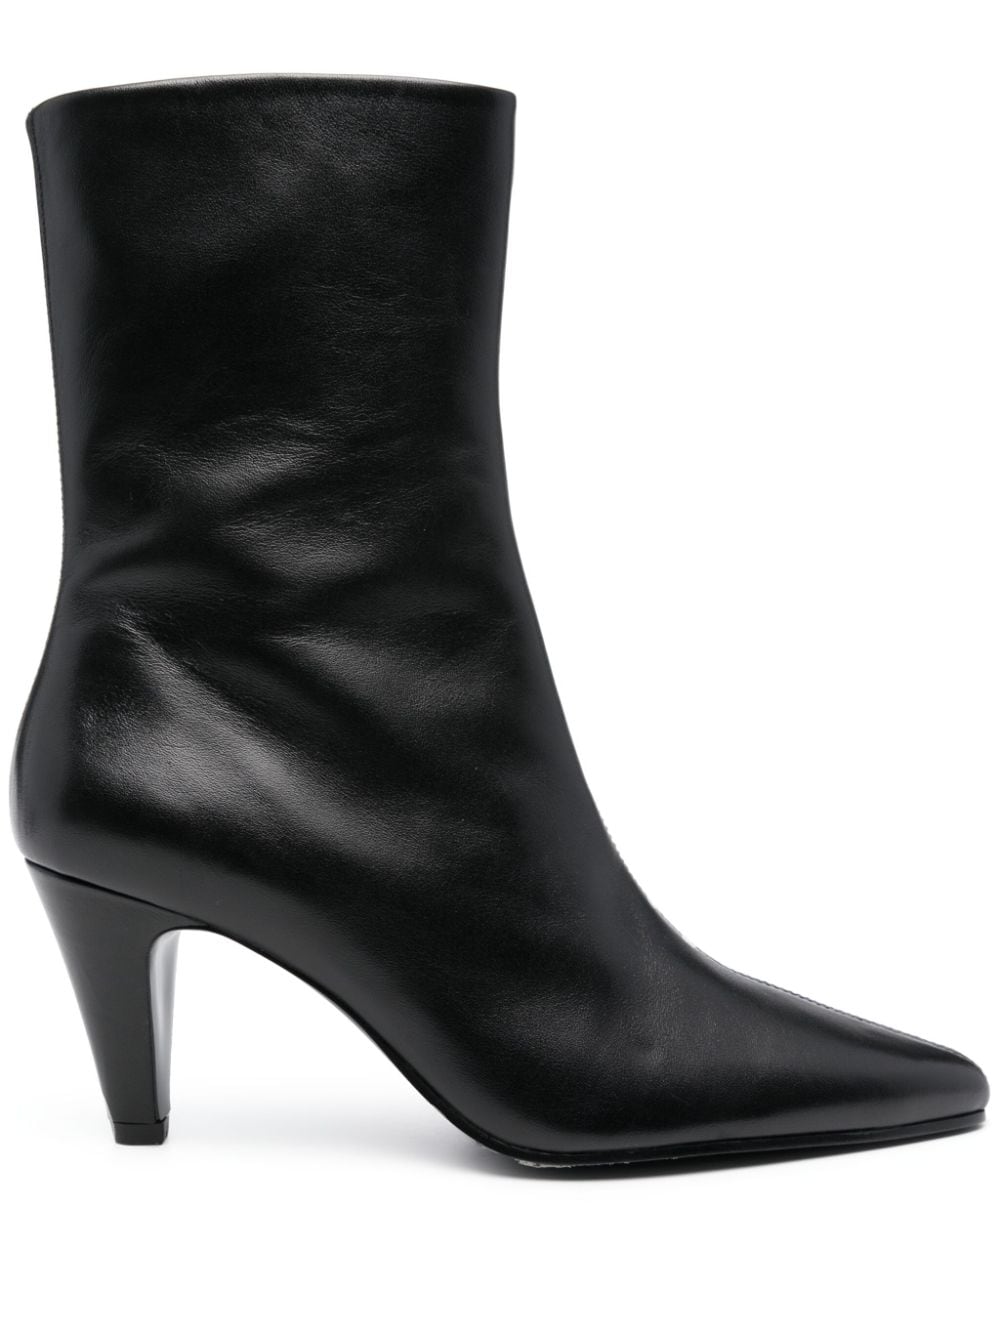 ankle-high 75mm boots